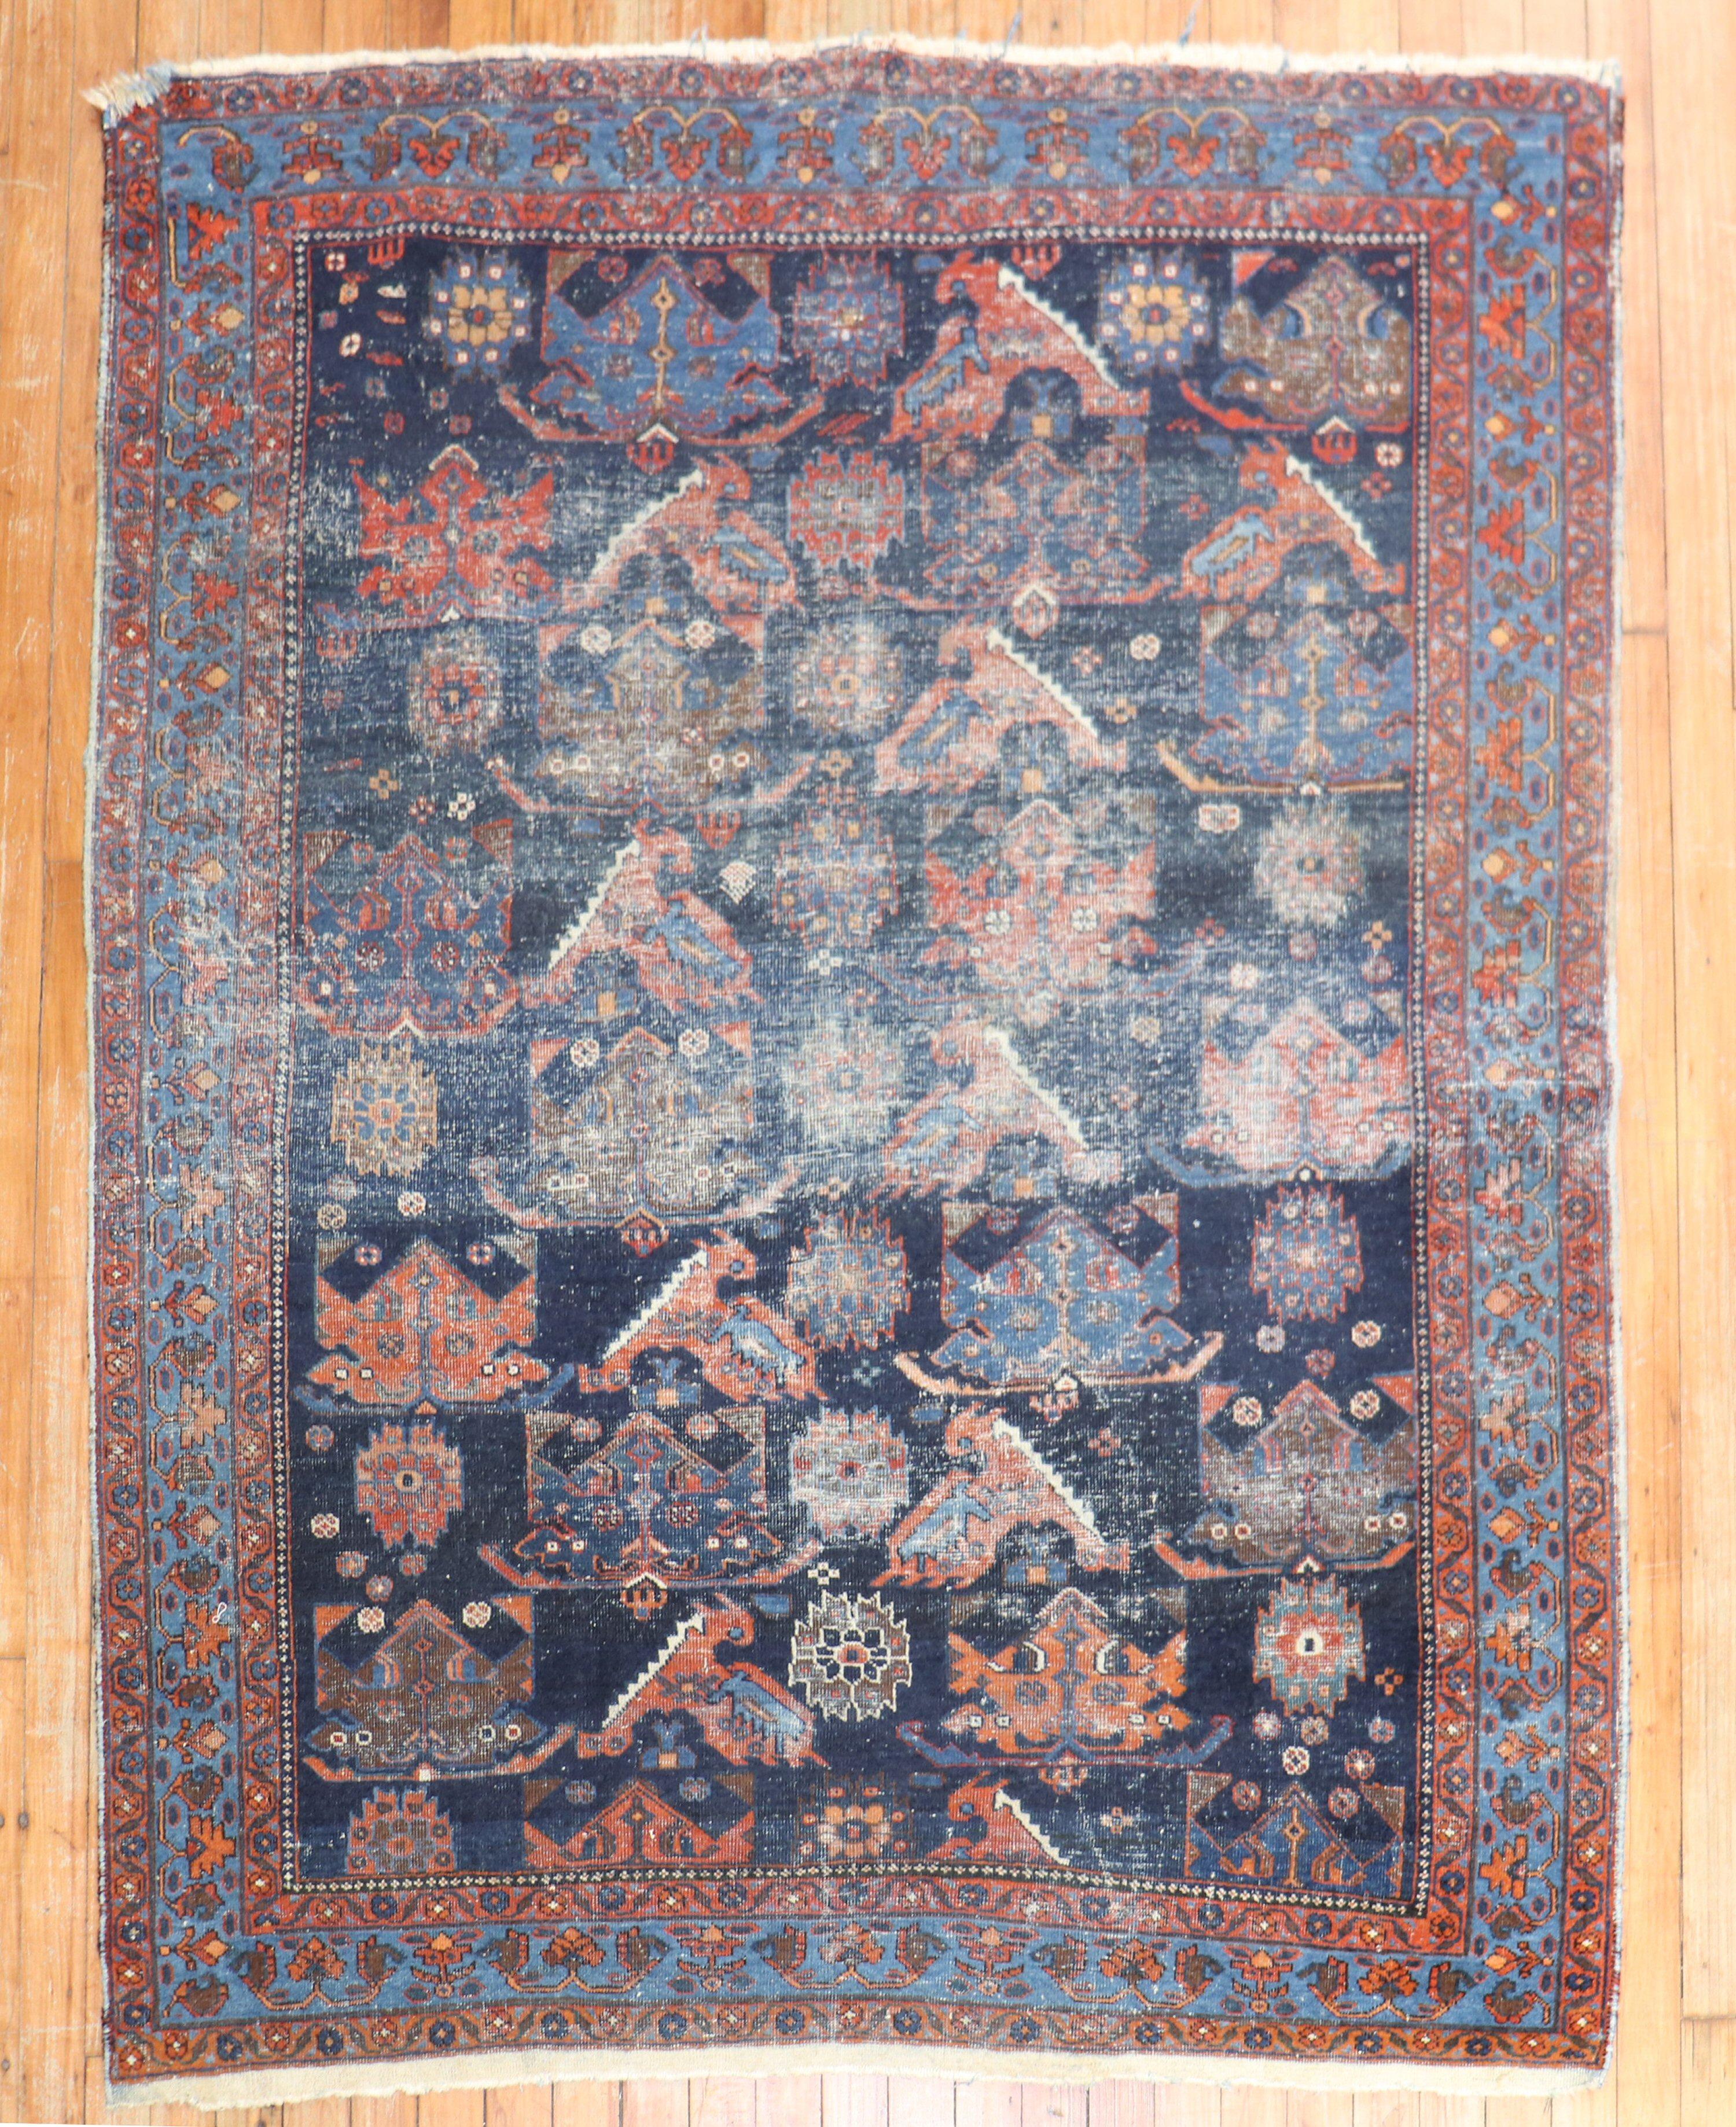 An early 20th-century worn Persian square tribal rug

Measure: 4'6'' x 5'7''.